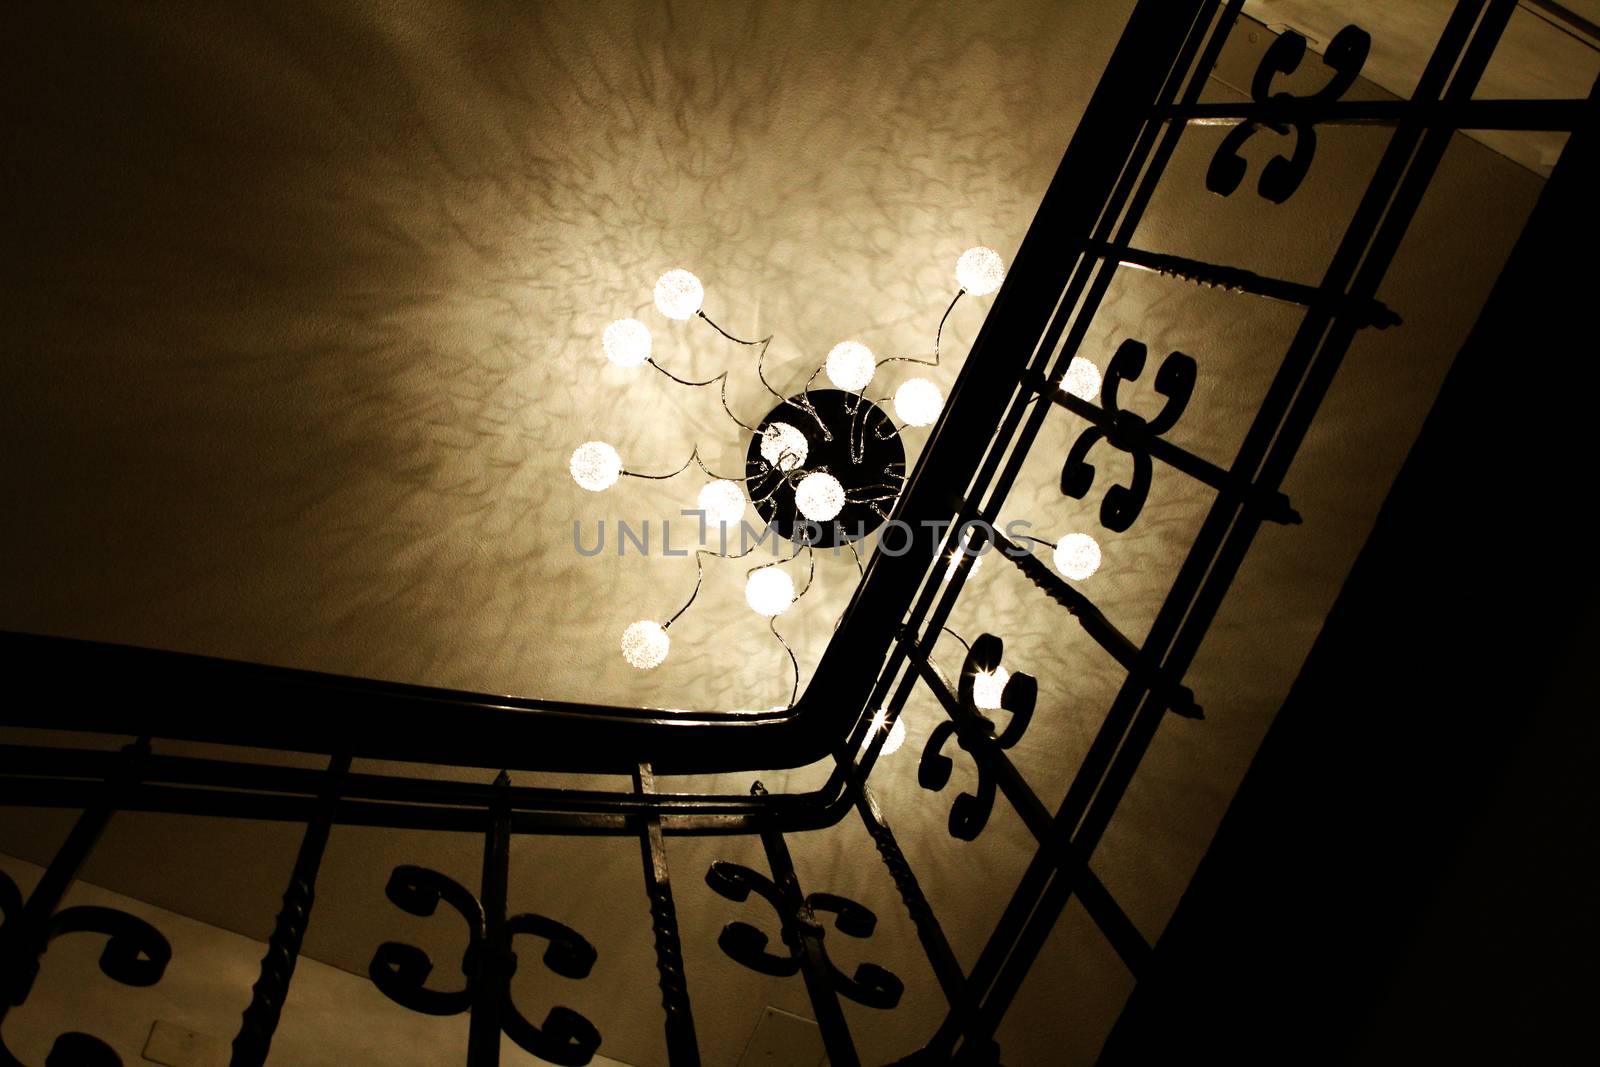 stair case with railing and fancy lamp in Luzern, Switzerland. Reflection on ceiling